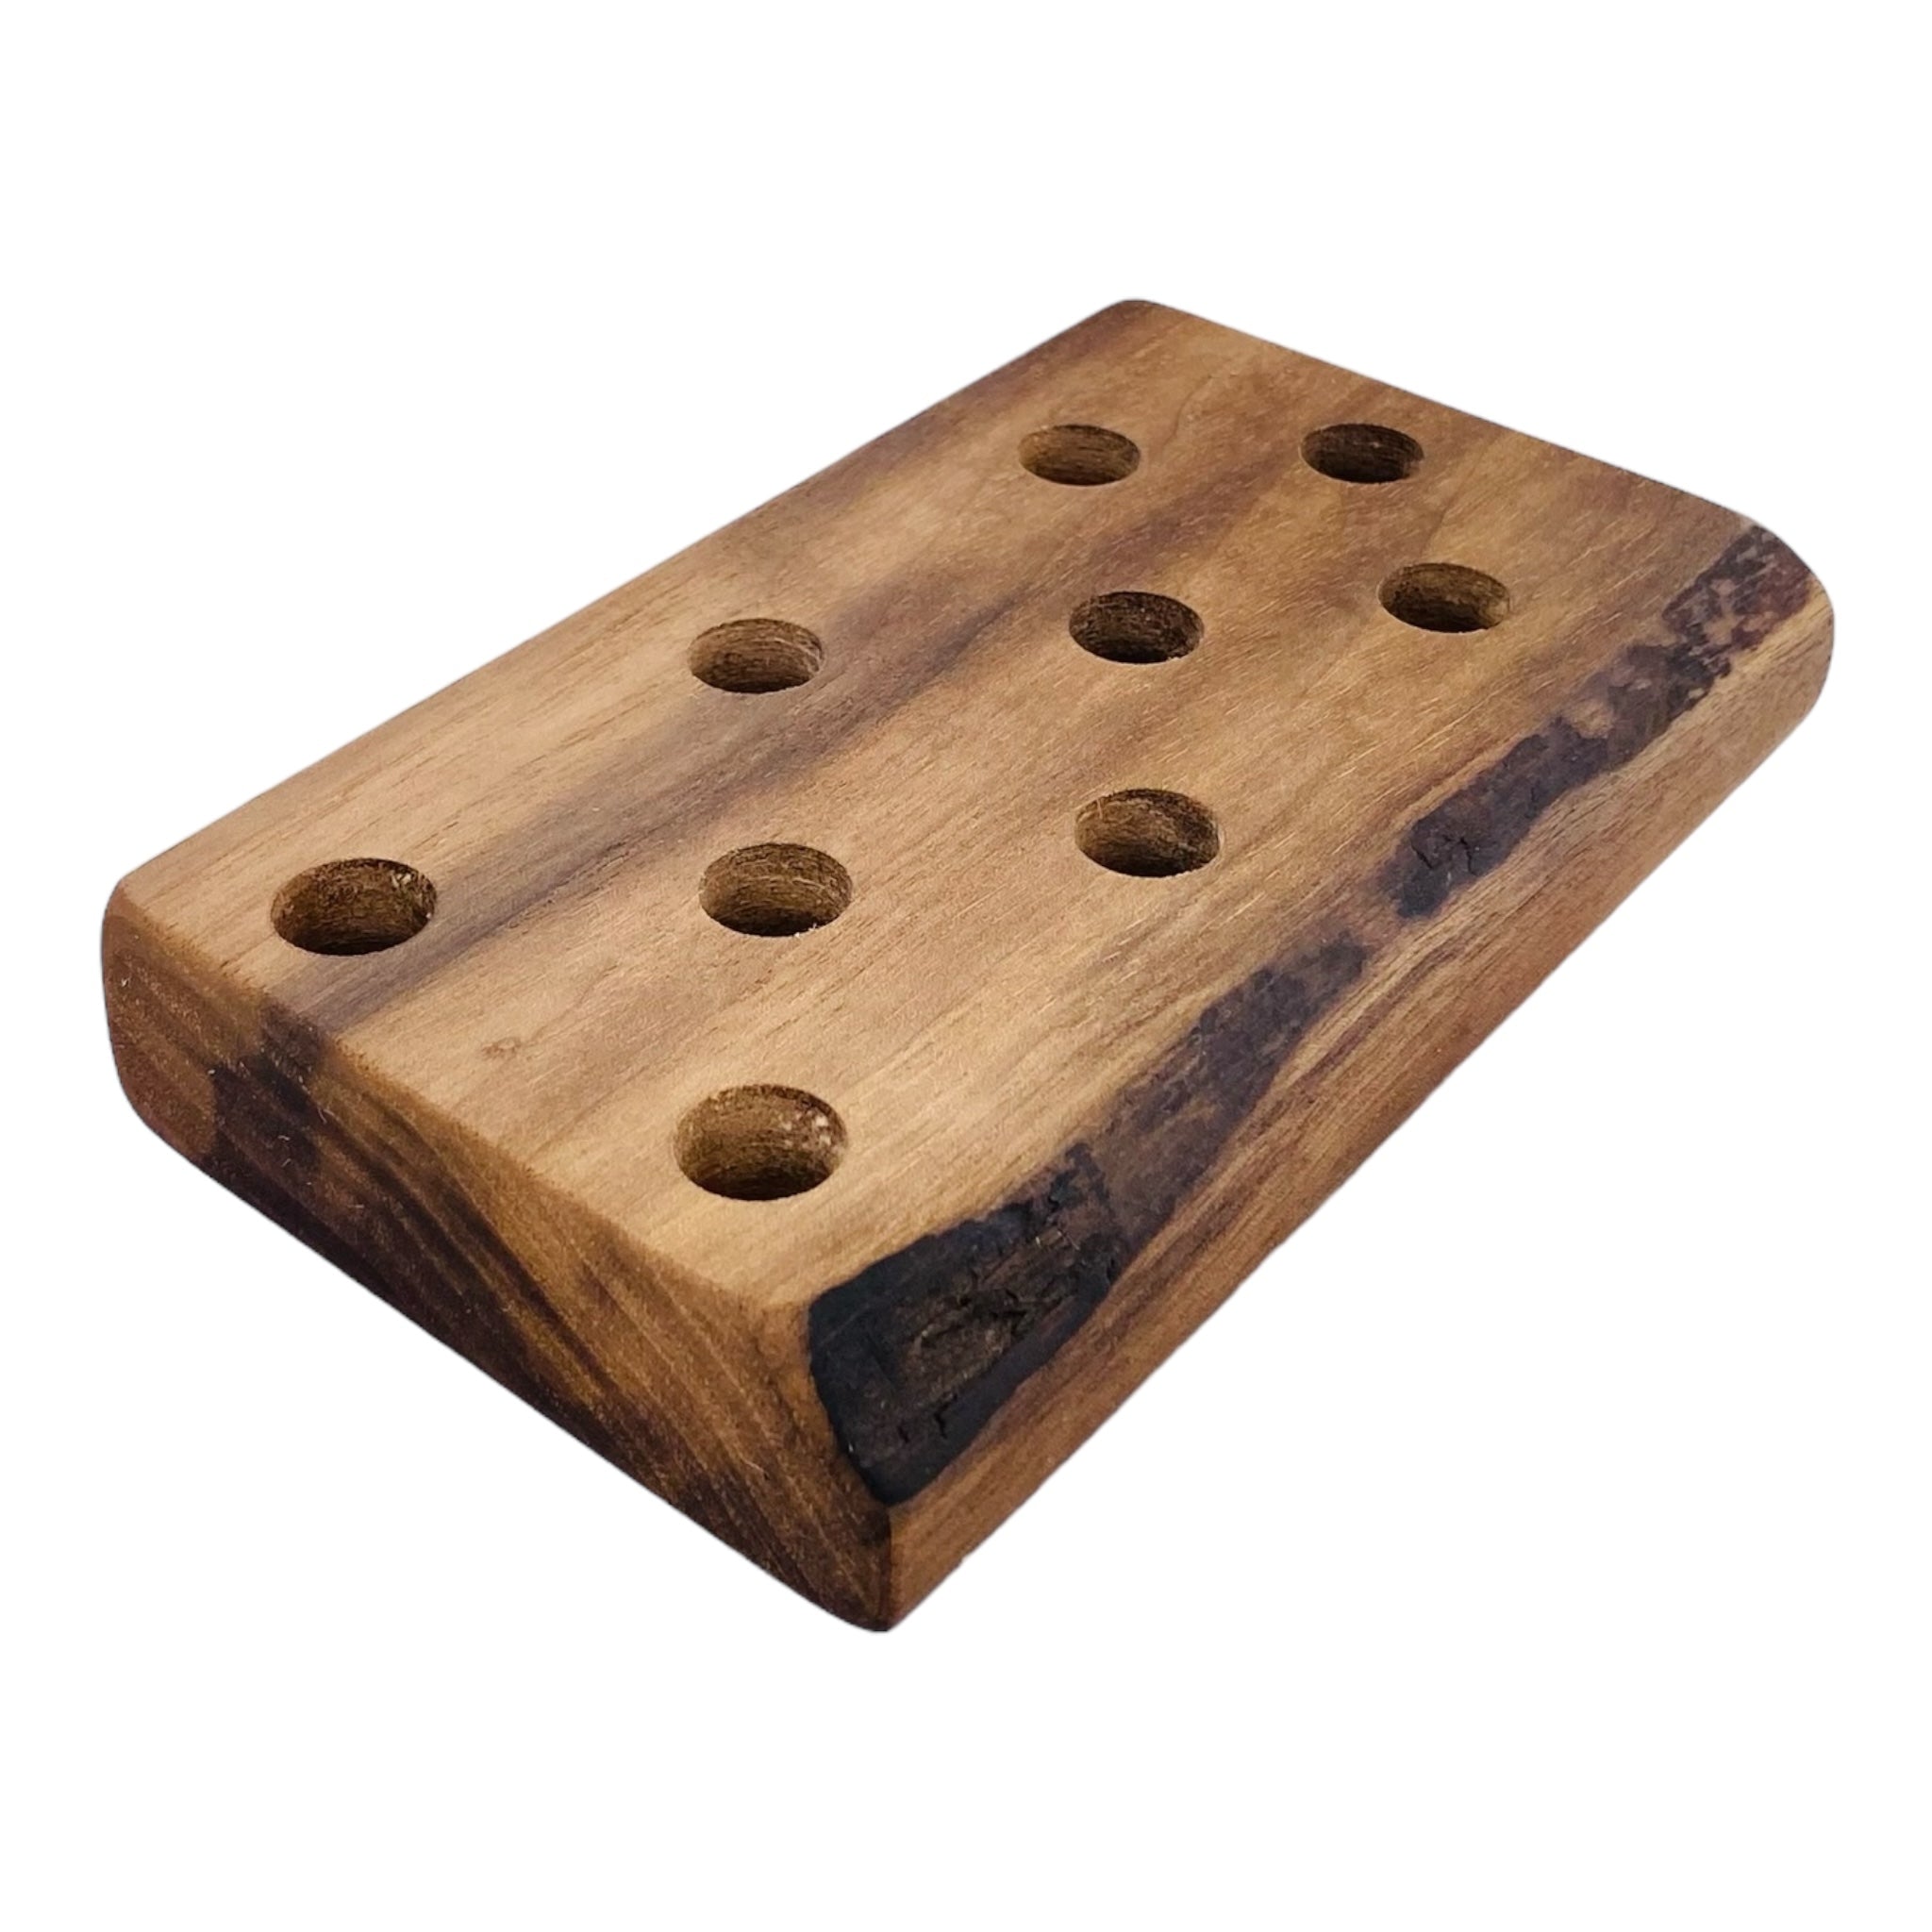 9 Hole Wood Display Stand Holder For 14mm Bong Bowl Pieces Or Quartz Bangers - Black Walnut